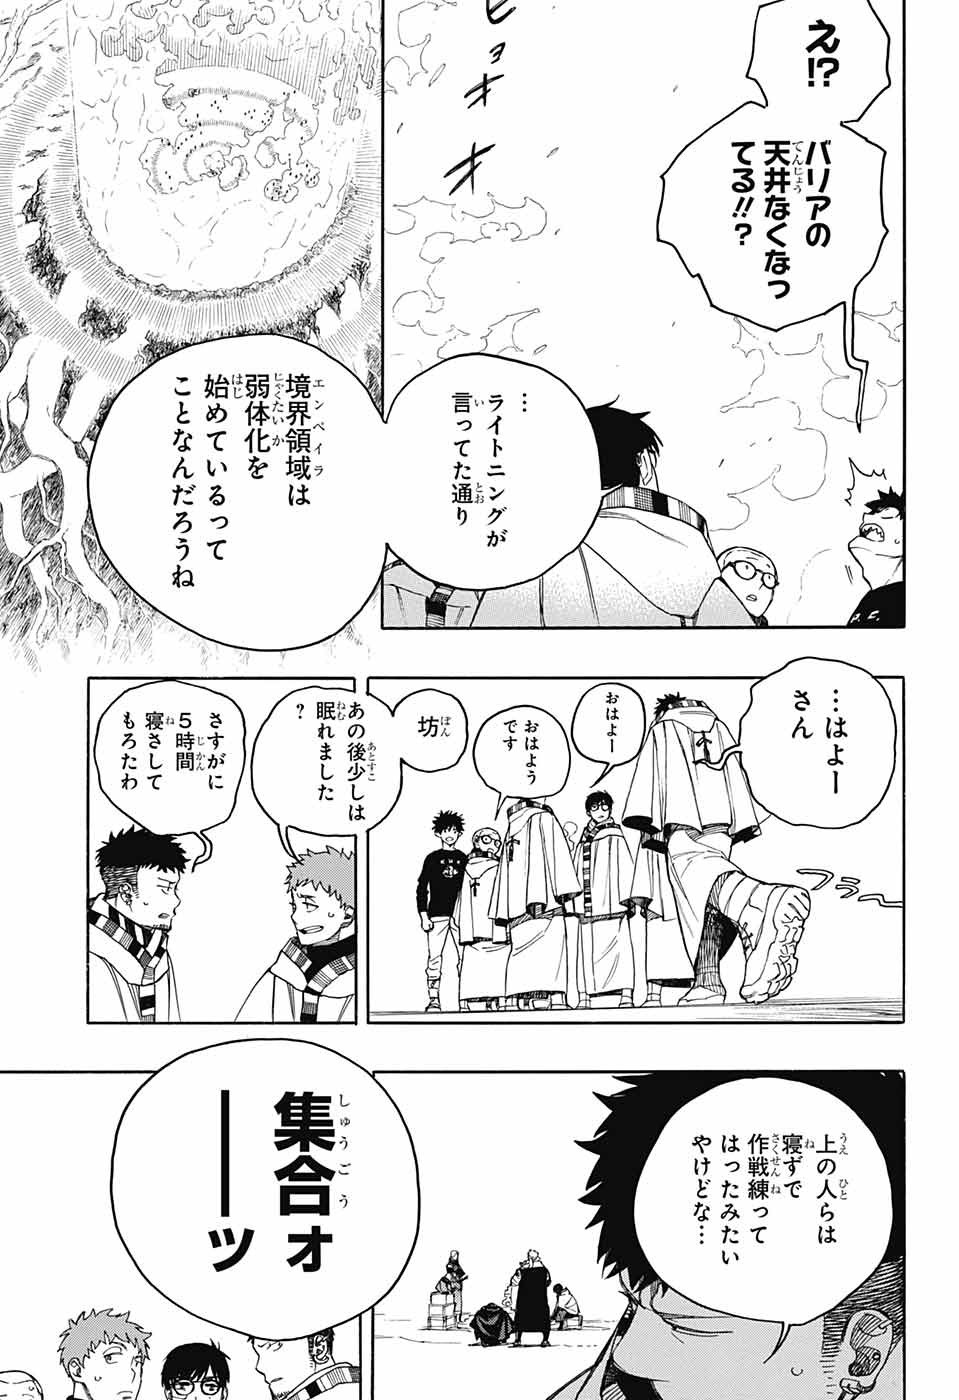 Ao no Exorcist - Chapter 145 - Page 3